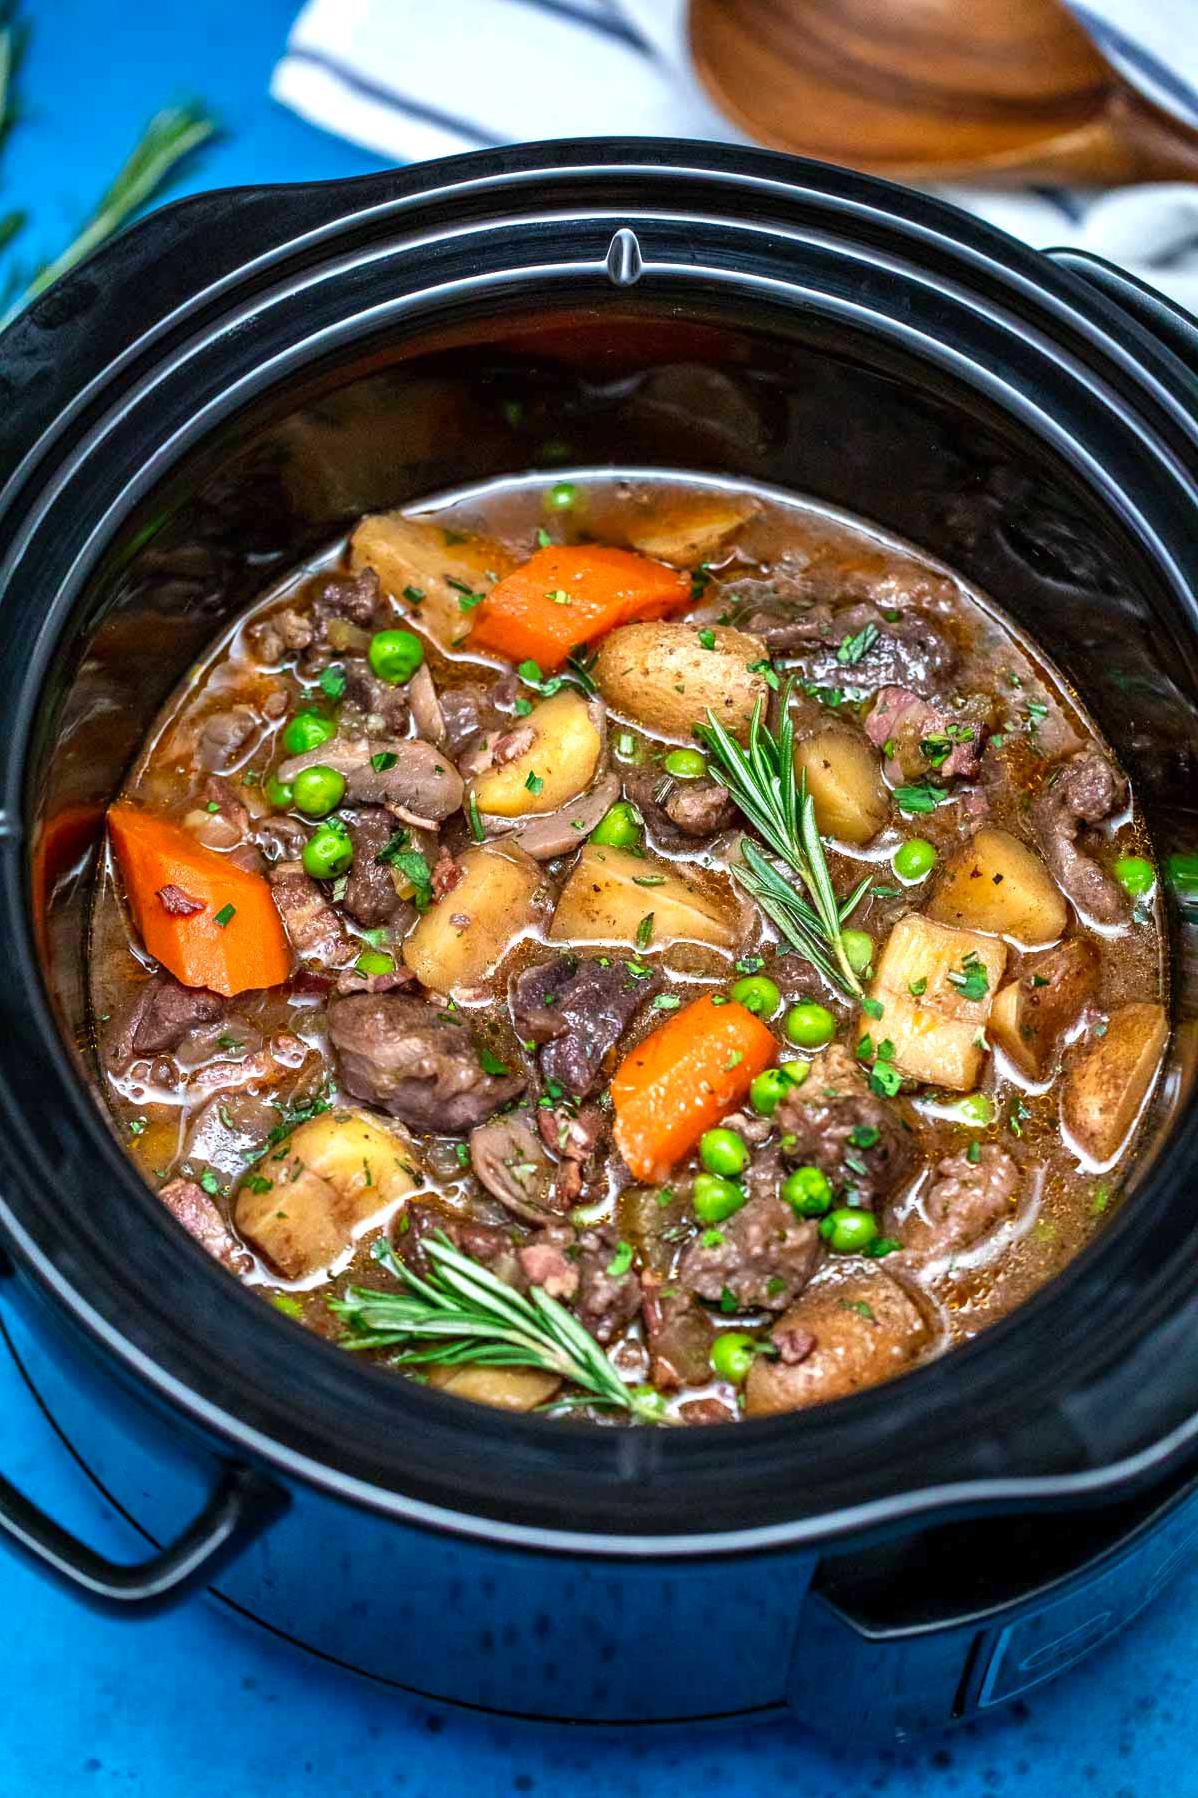  A bowl of comfort awaits as you dig into this scrumptious Irish Stew.